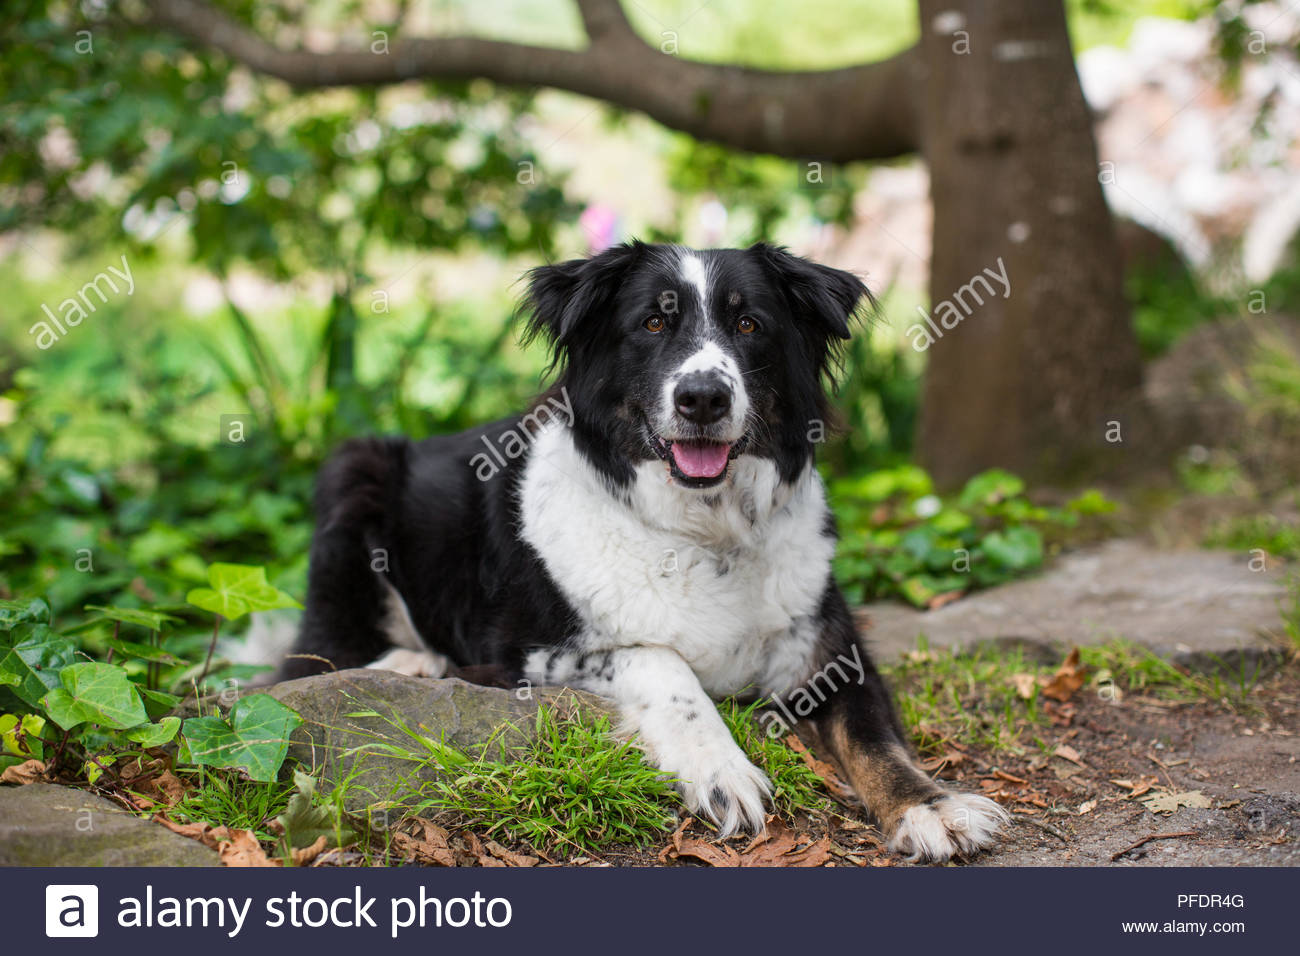 Black And White Border Collie Mix Dog Lying Down On Grass In Park